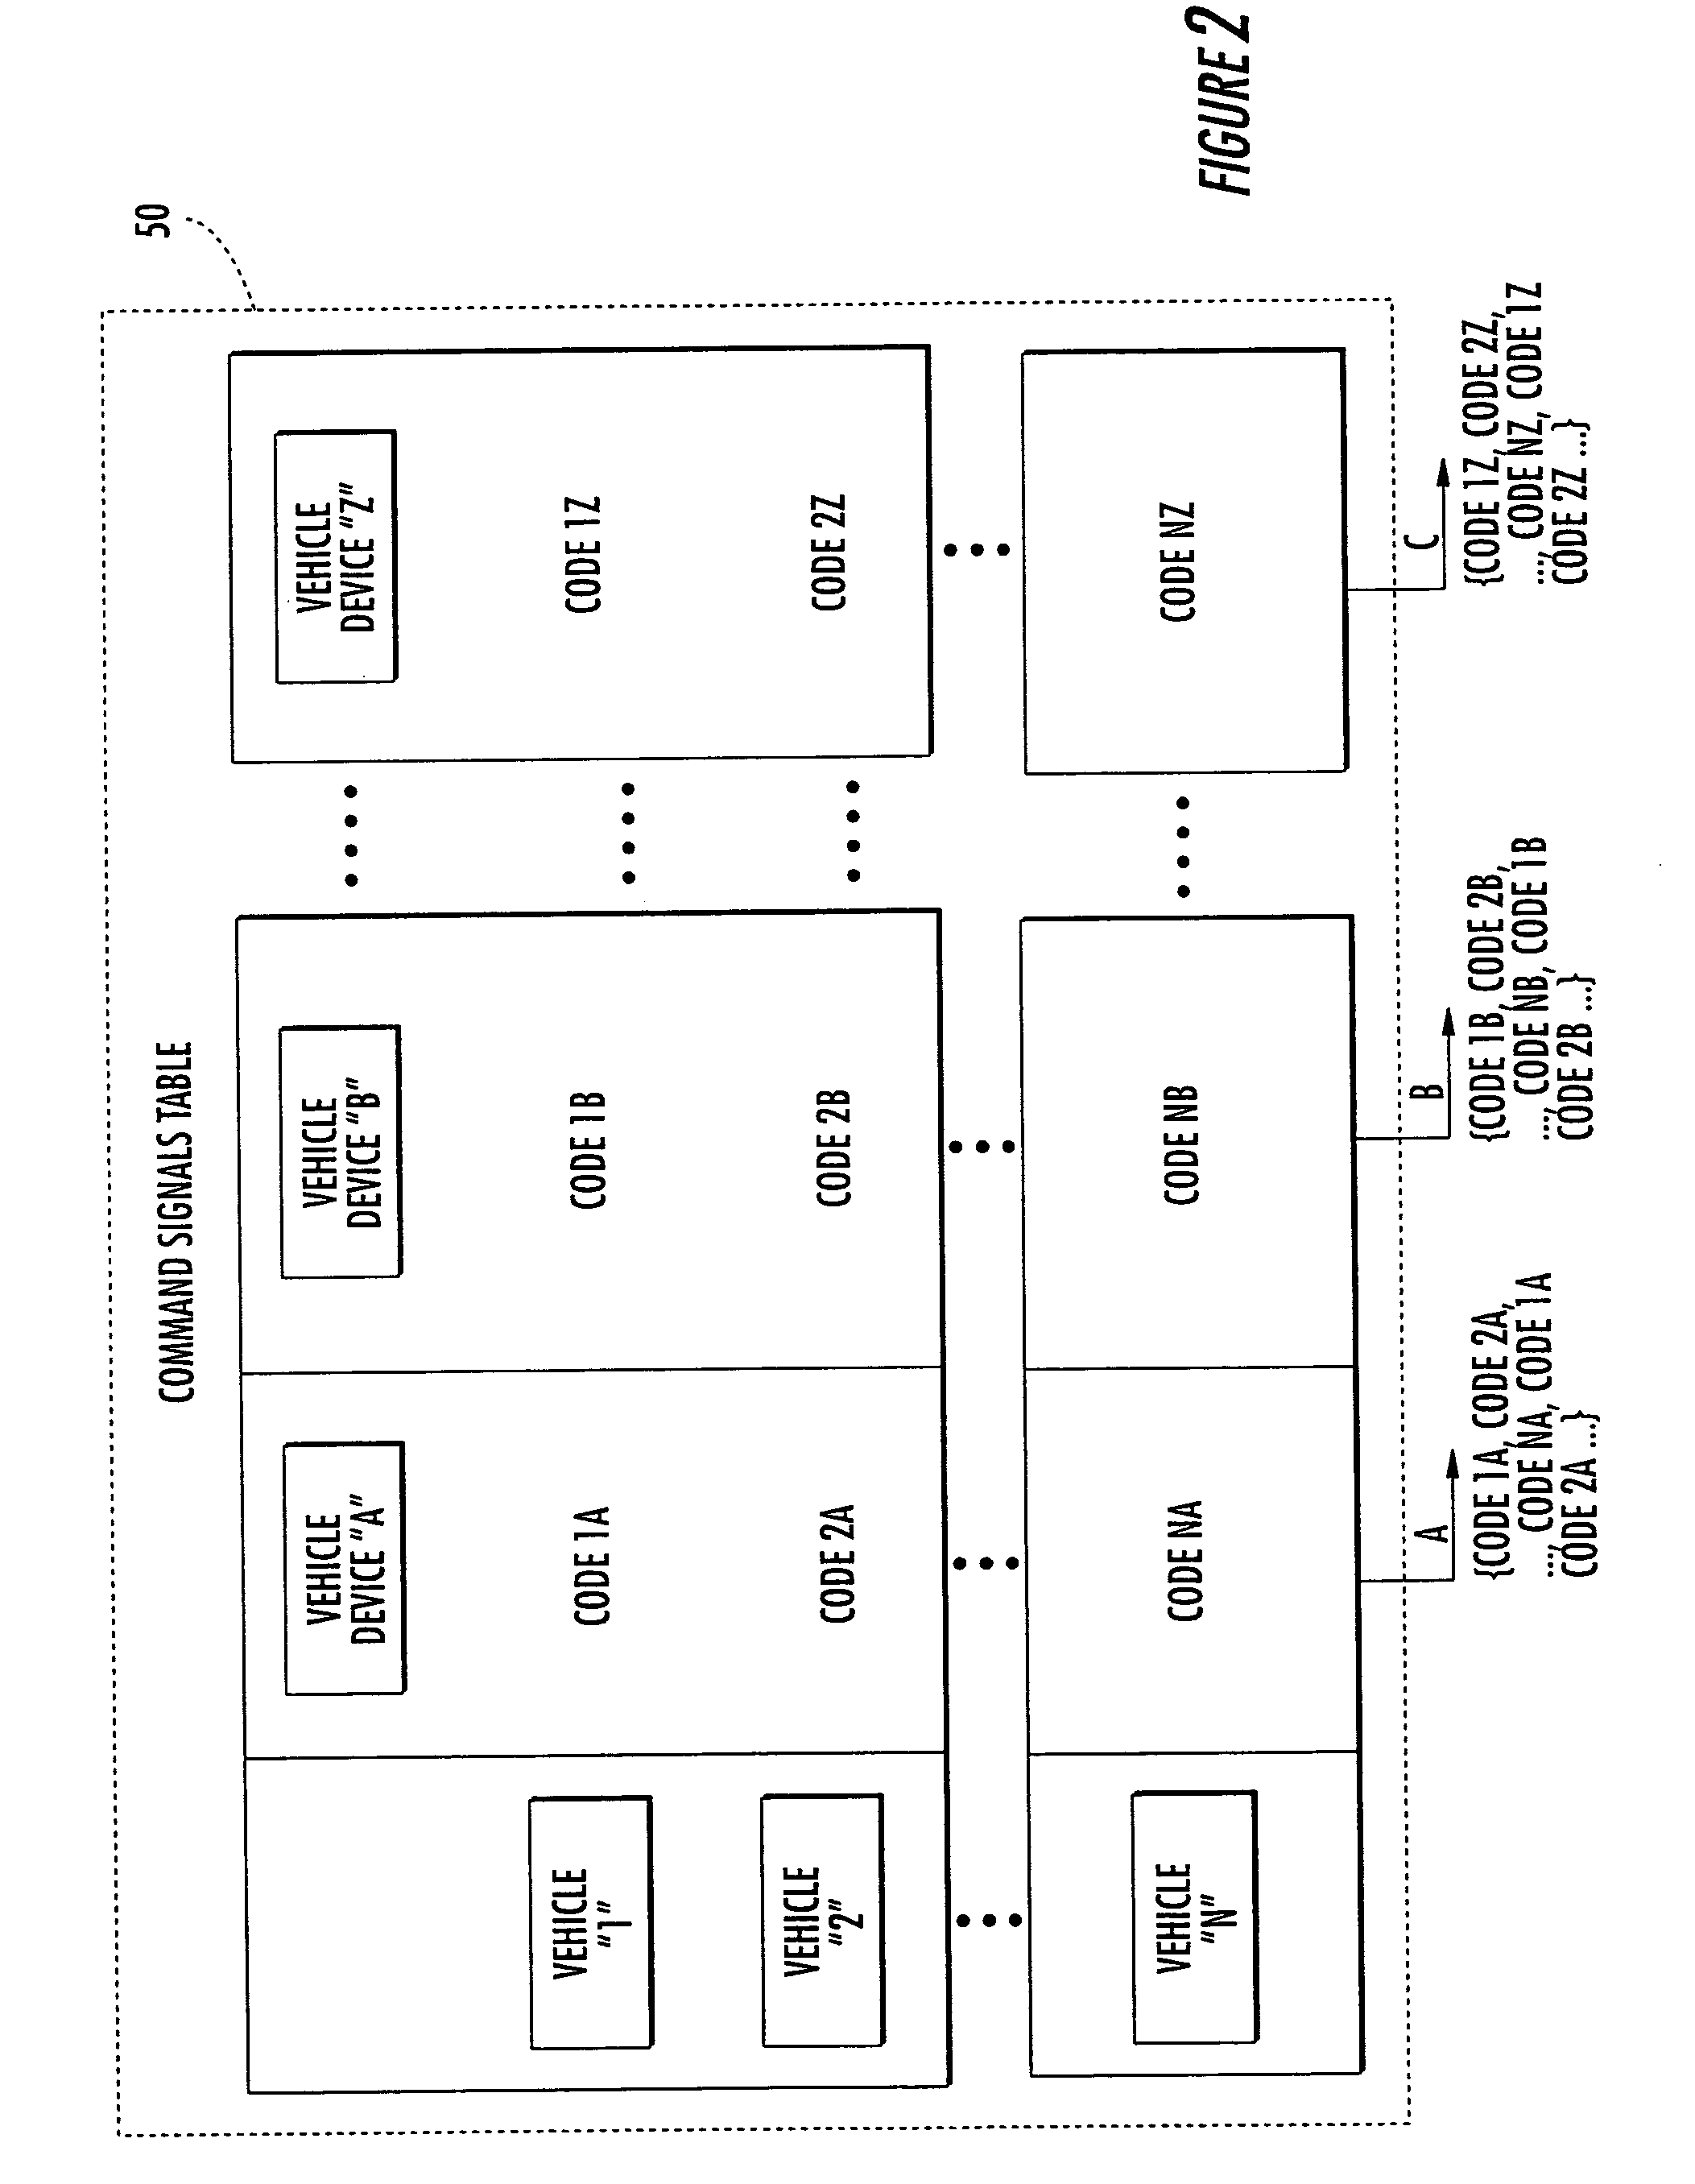 Remote start control system for starting an engine of a vehicle based on selected vehicle data carried by a data communications bus and associated methods